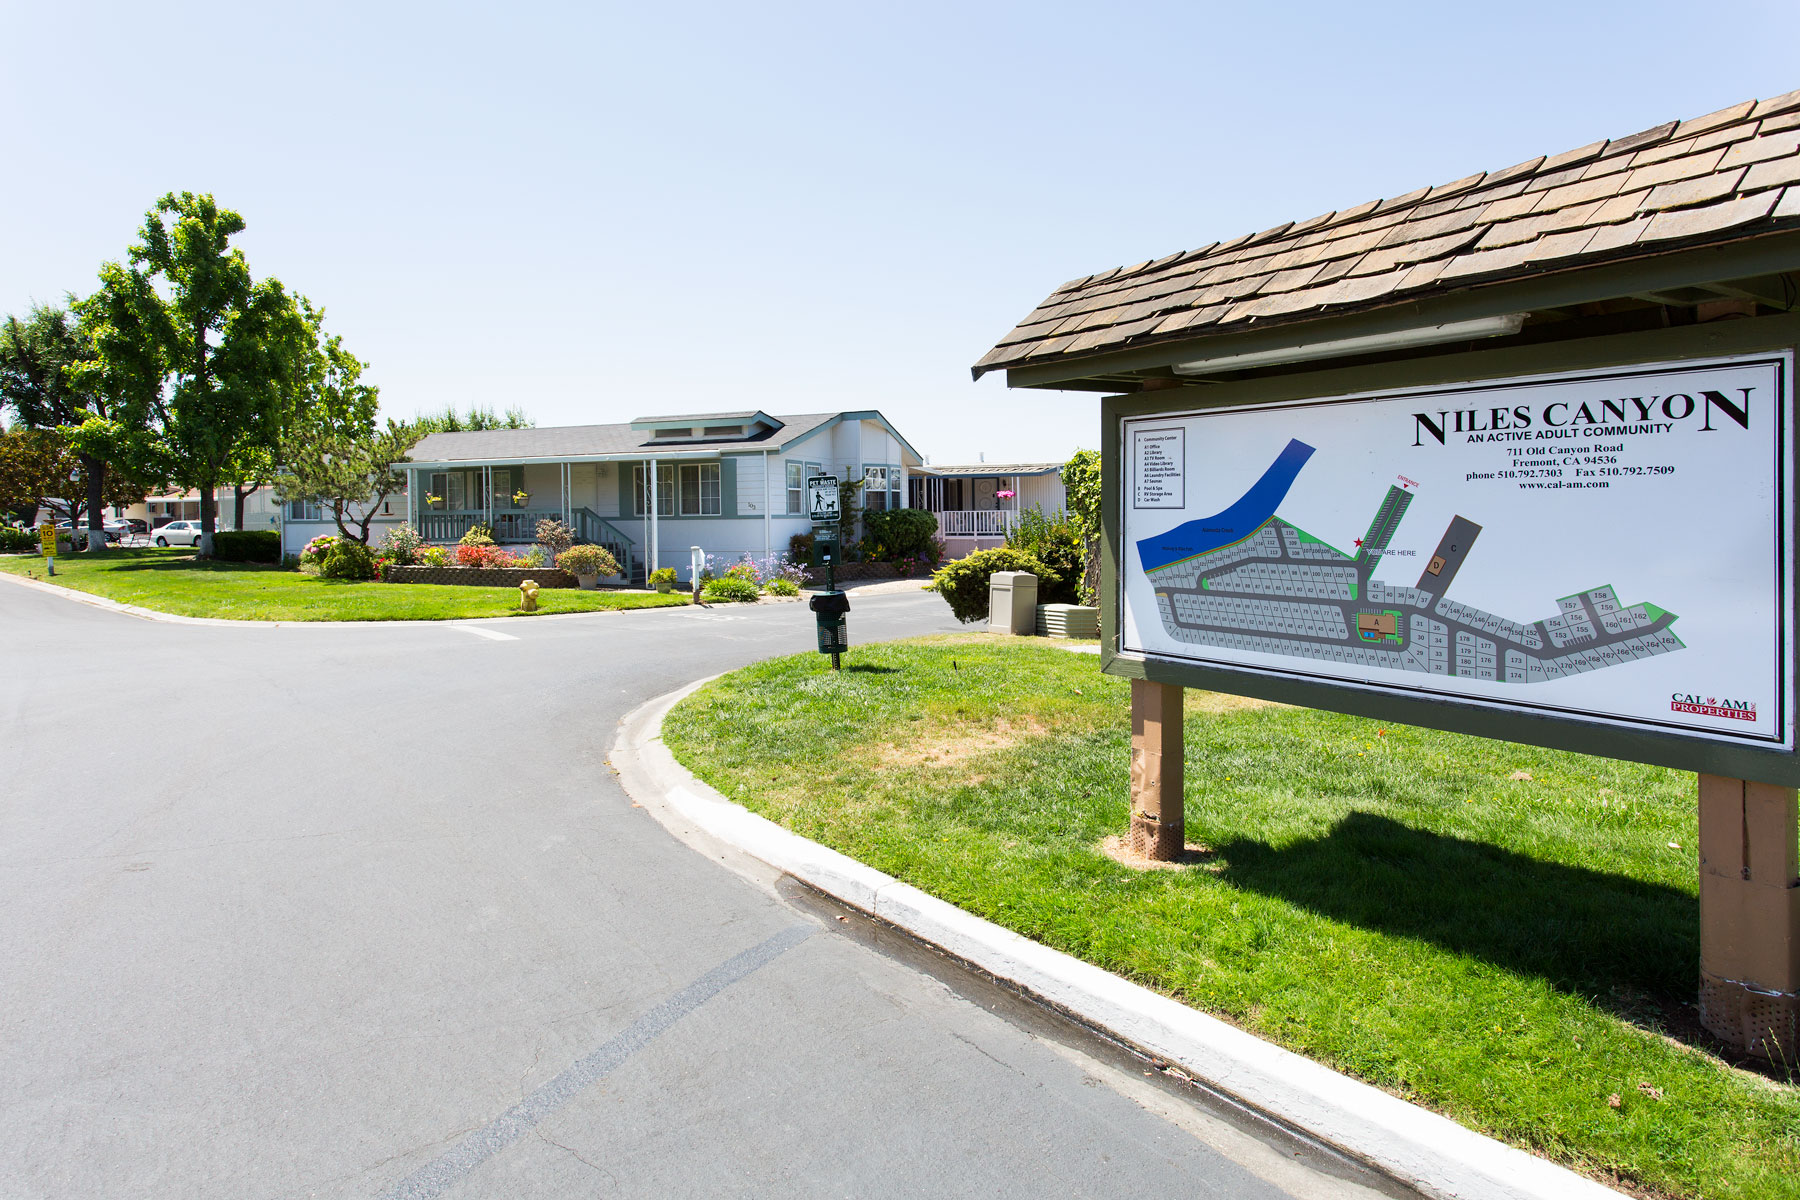 Entrance to Niles Canyon includes a large map of the community for guests and residents to use for reference.